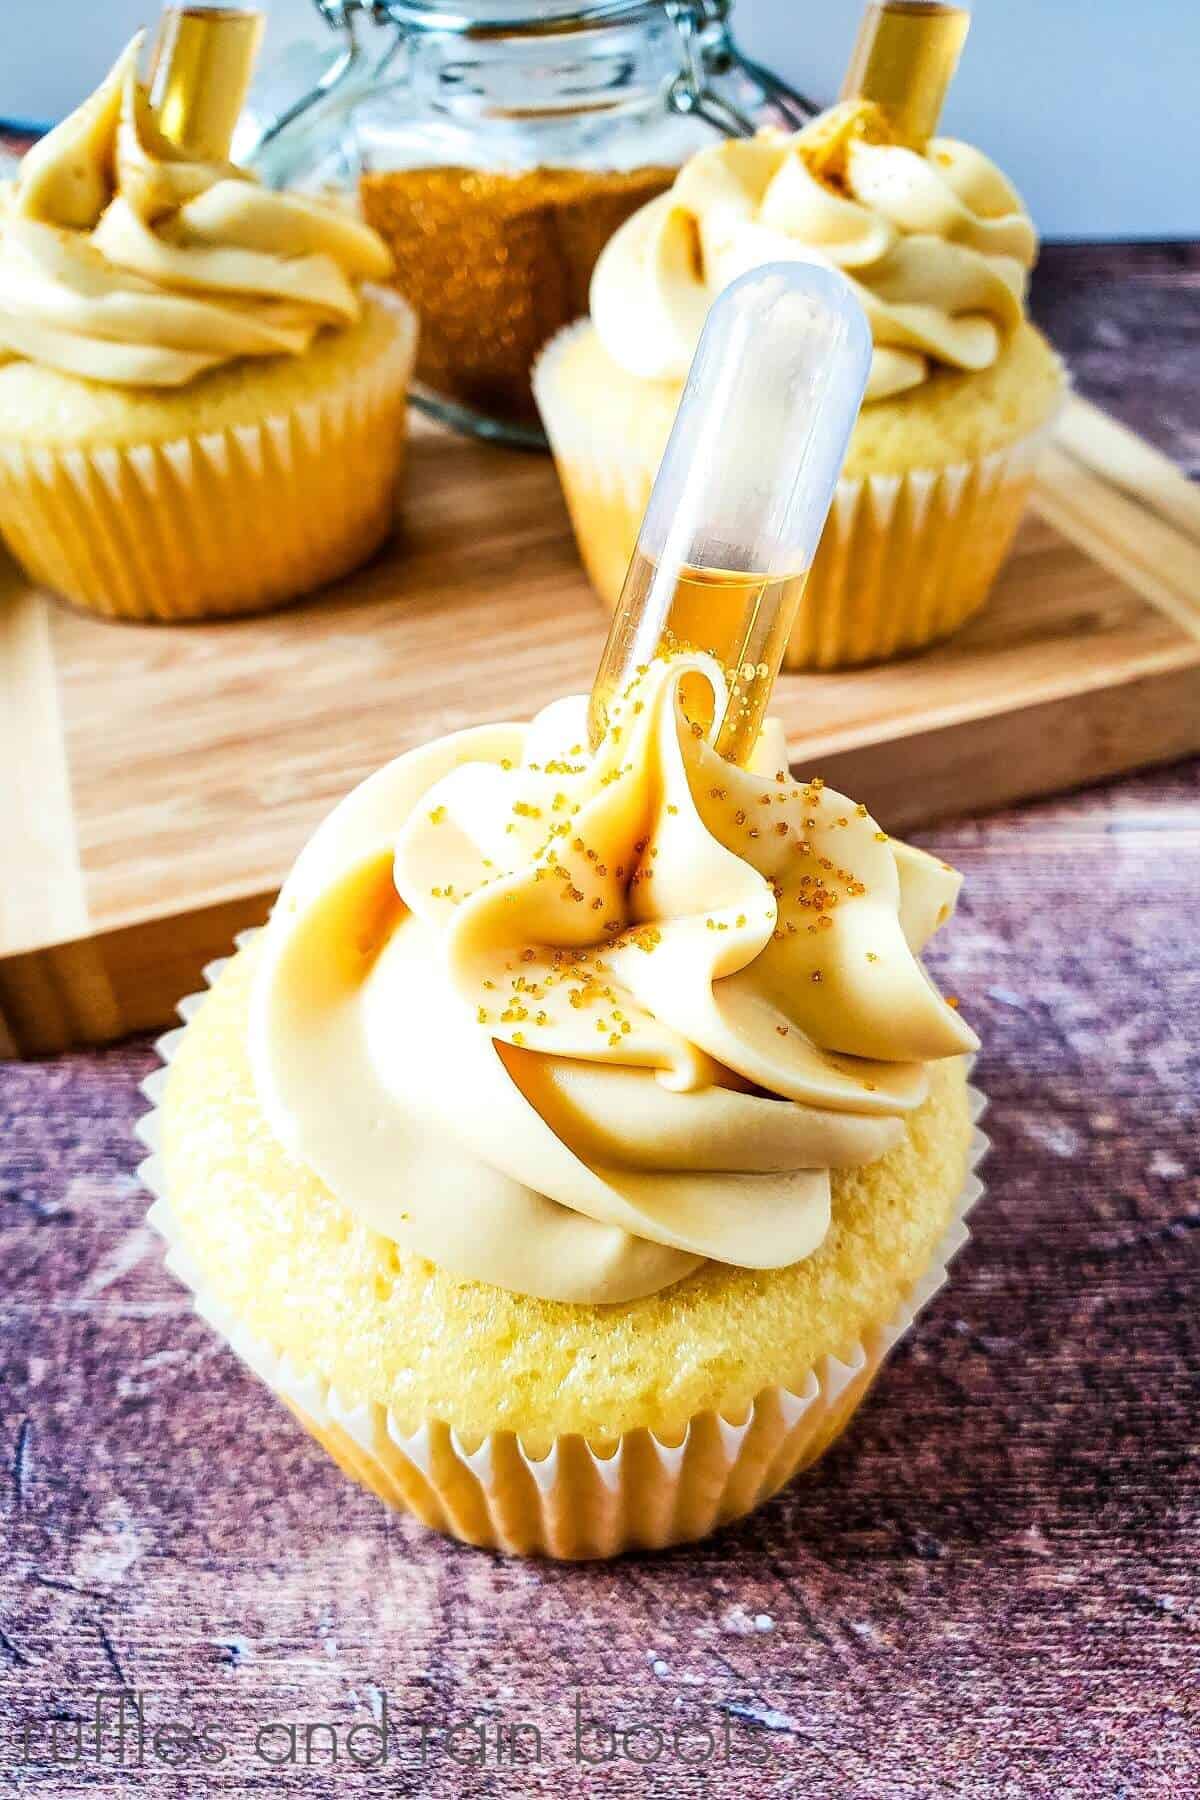 A cognac cupcake in front of a wooden cutting board with 2 additional cupcakes on it, against a weathered wood background.